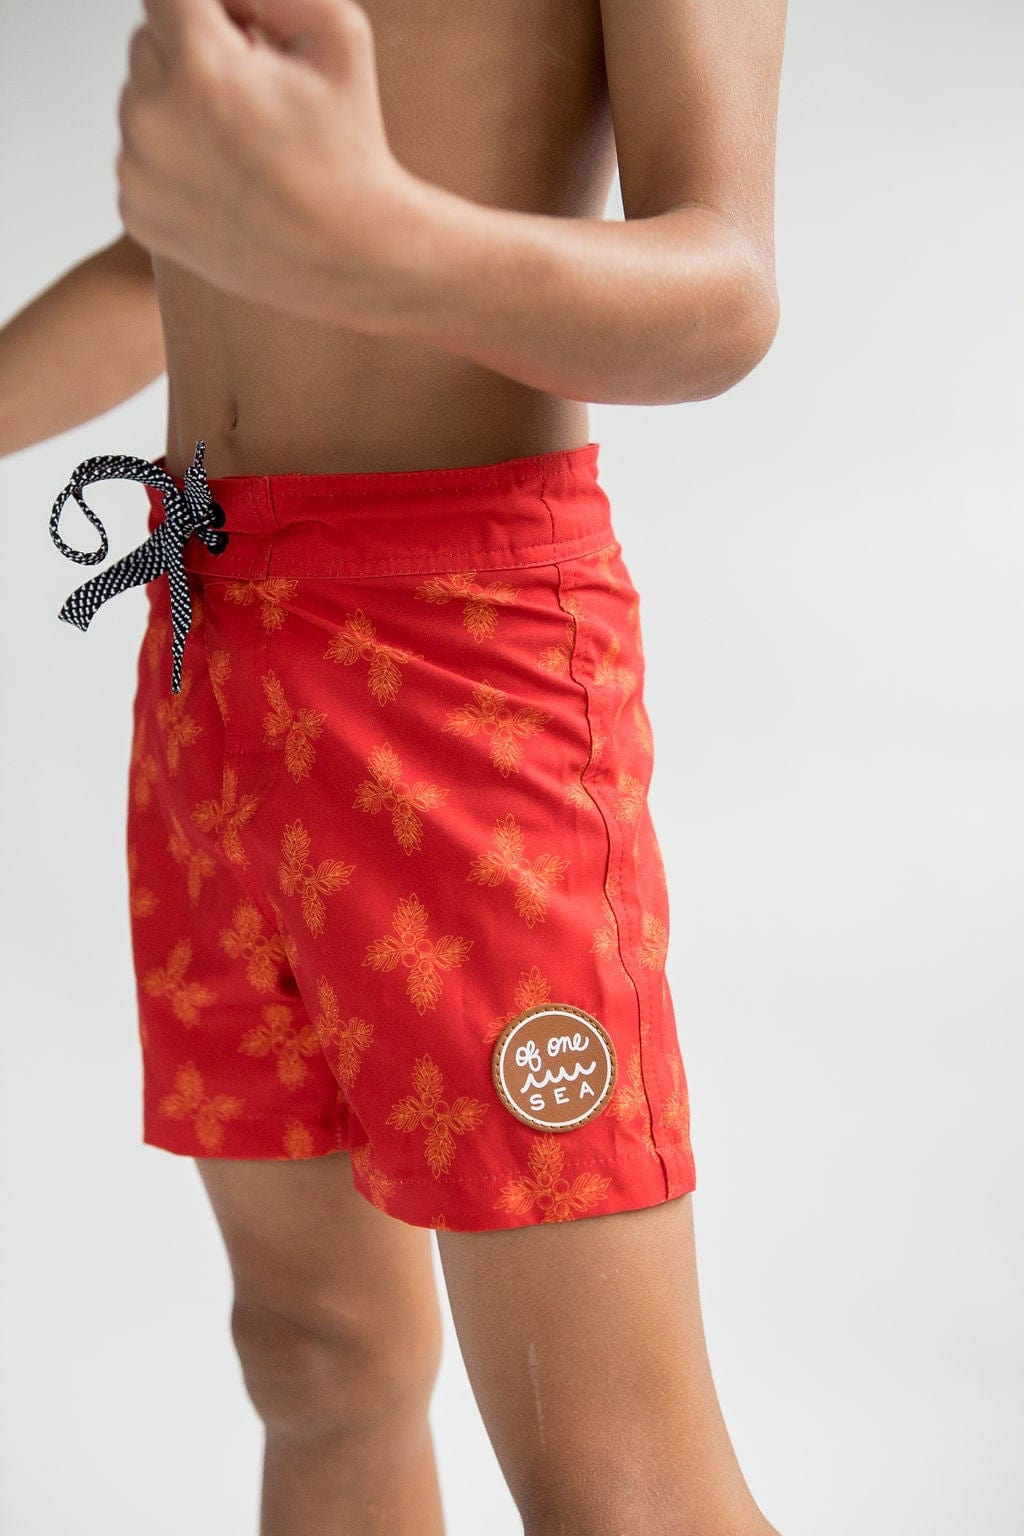 Toddler Soft Shorts for Swim in Red Breadfruit Bandana - OF ONE SEA